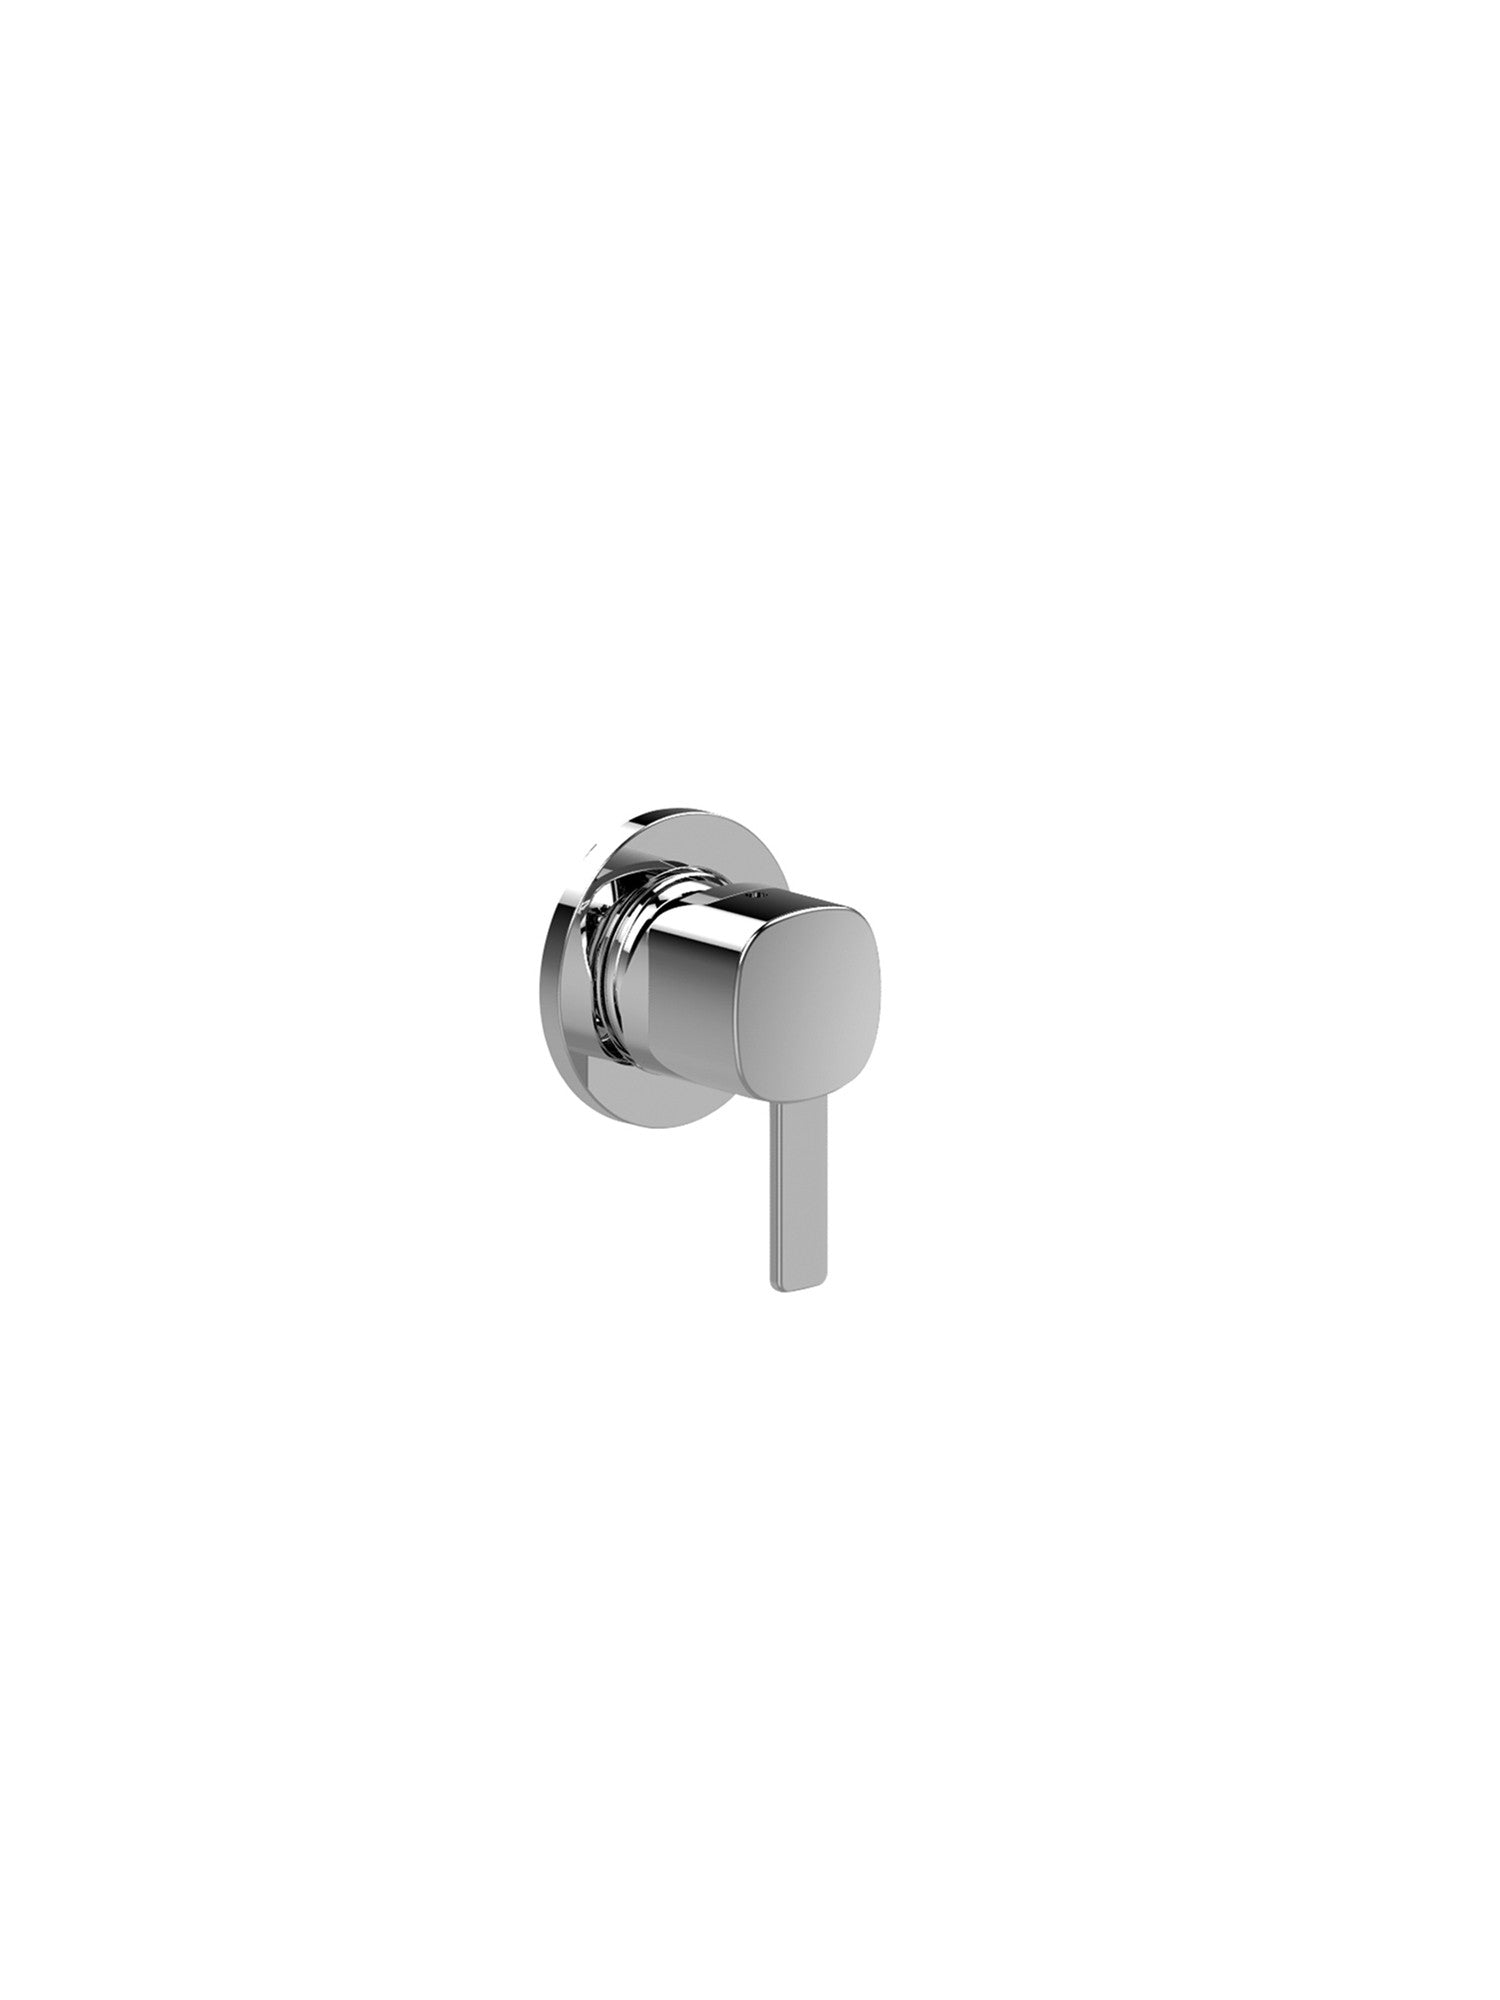 Lamé Conceal Shower Mixer #GPM163B